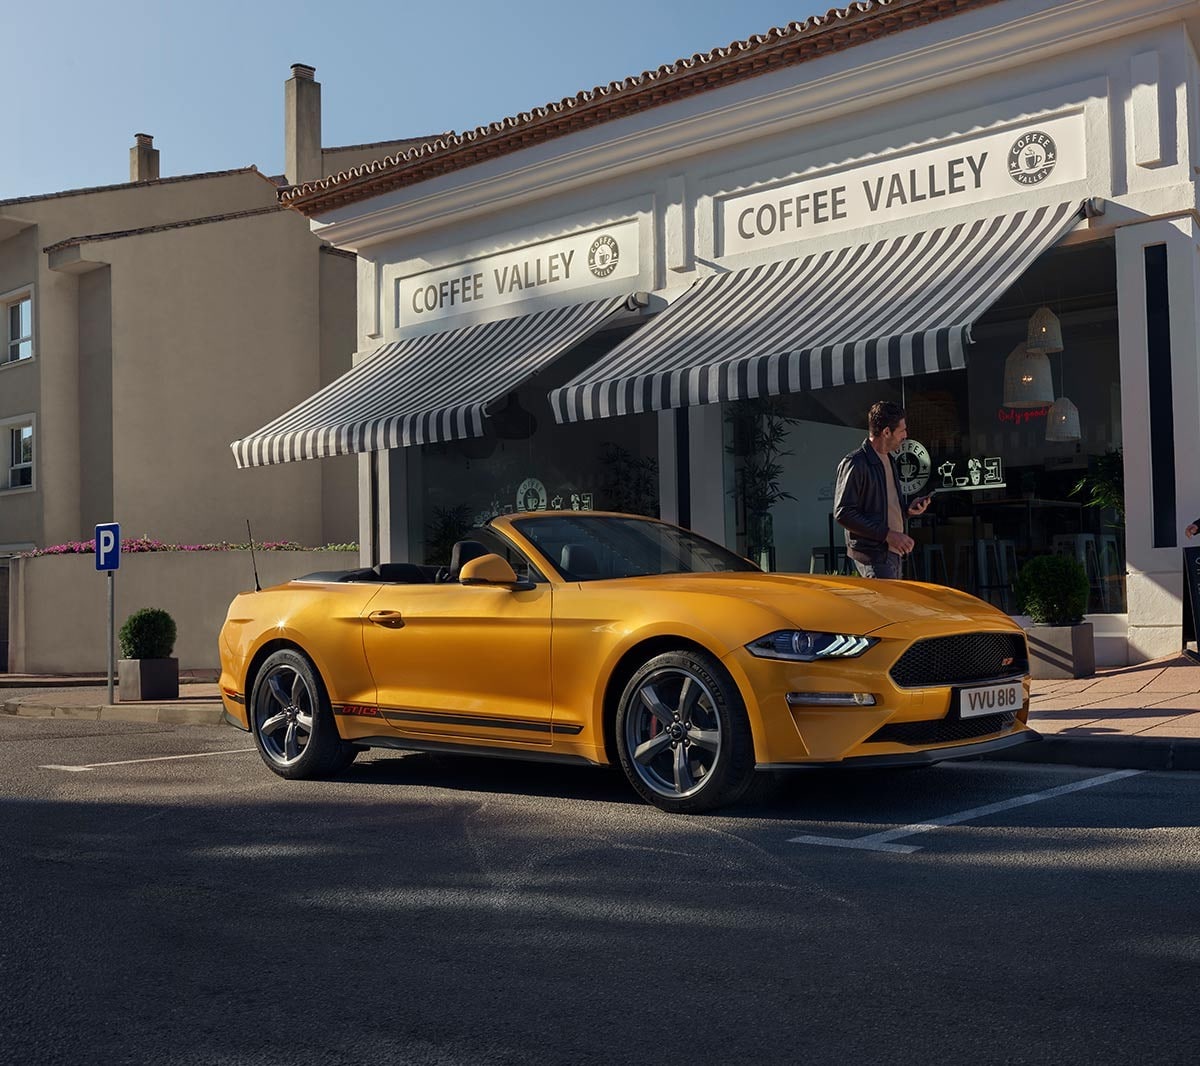 Ford Mustang California Edition parked infront of a coffee shop.